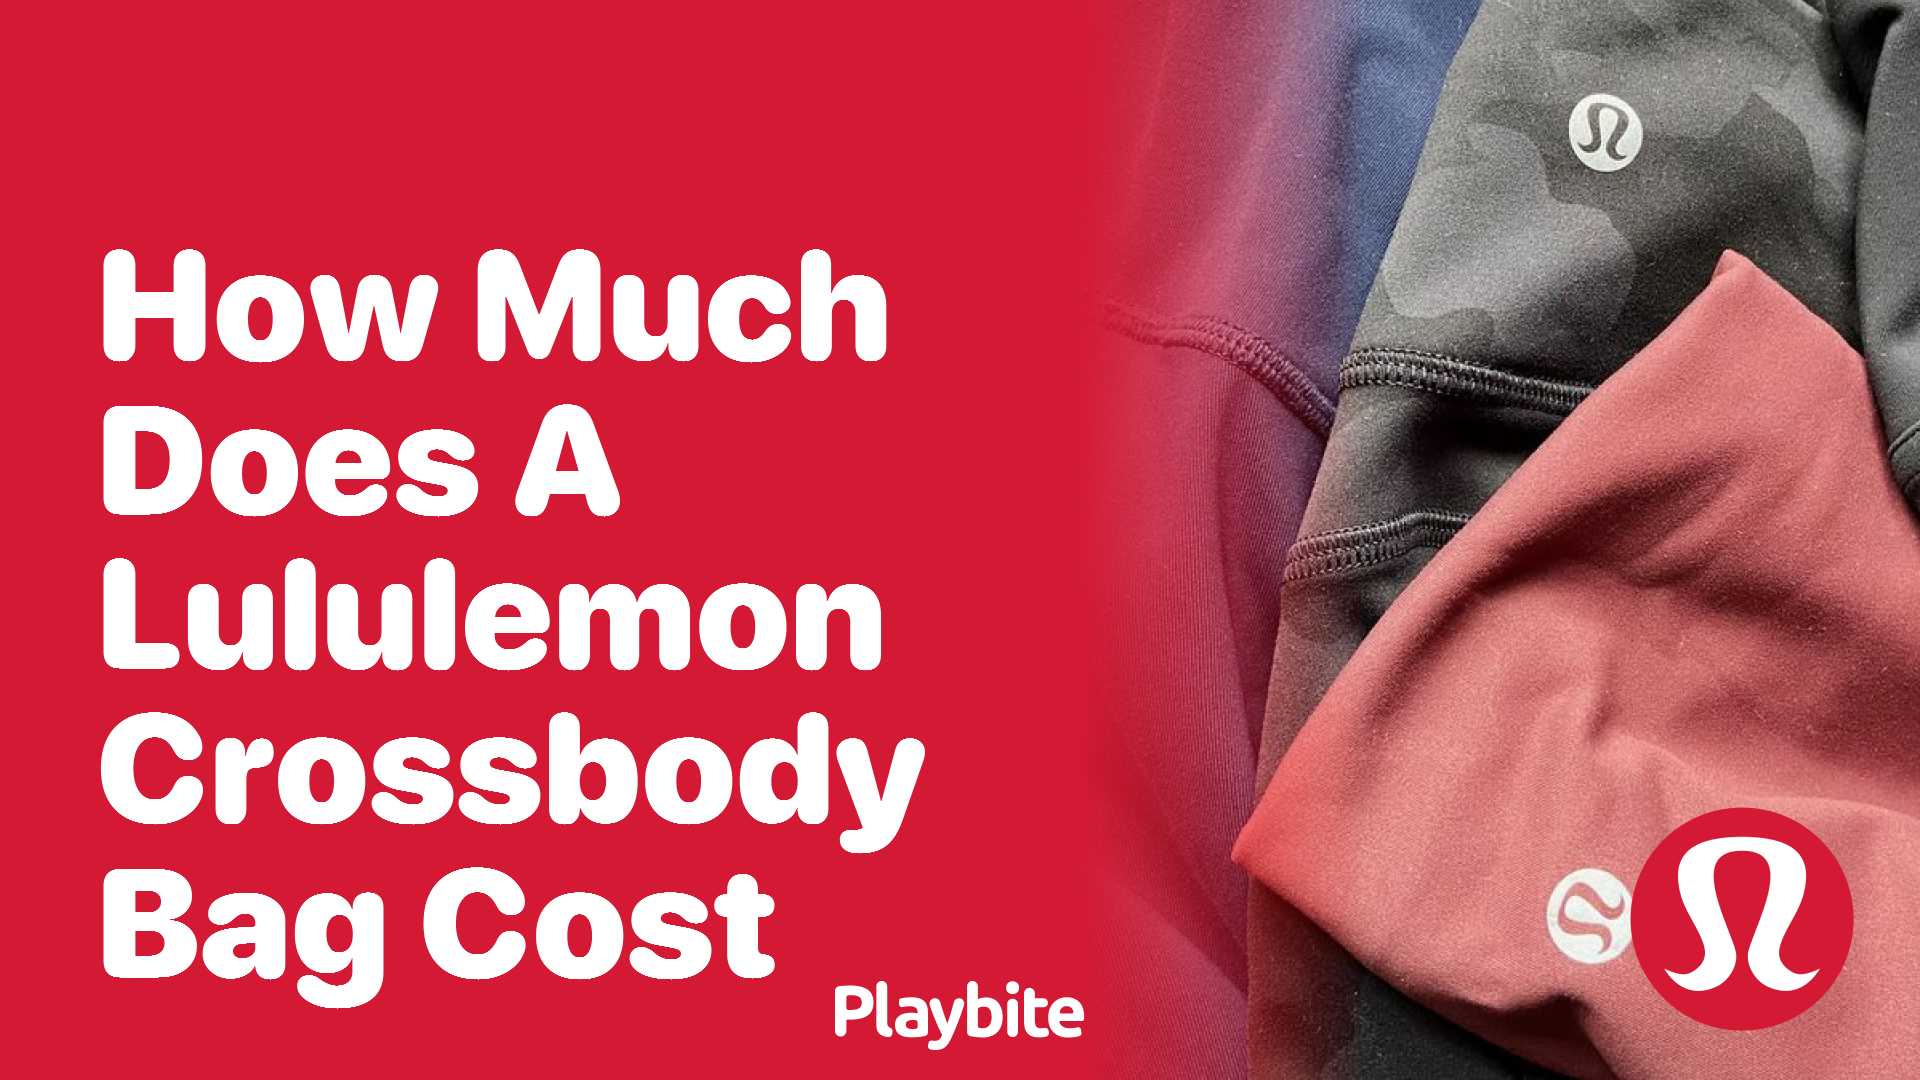 How Much Does a Lululemon Crossbody Bag Cost? - Playbite